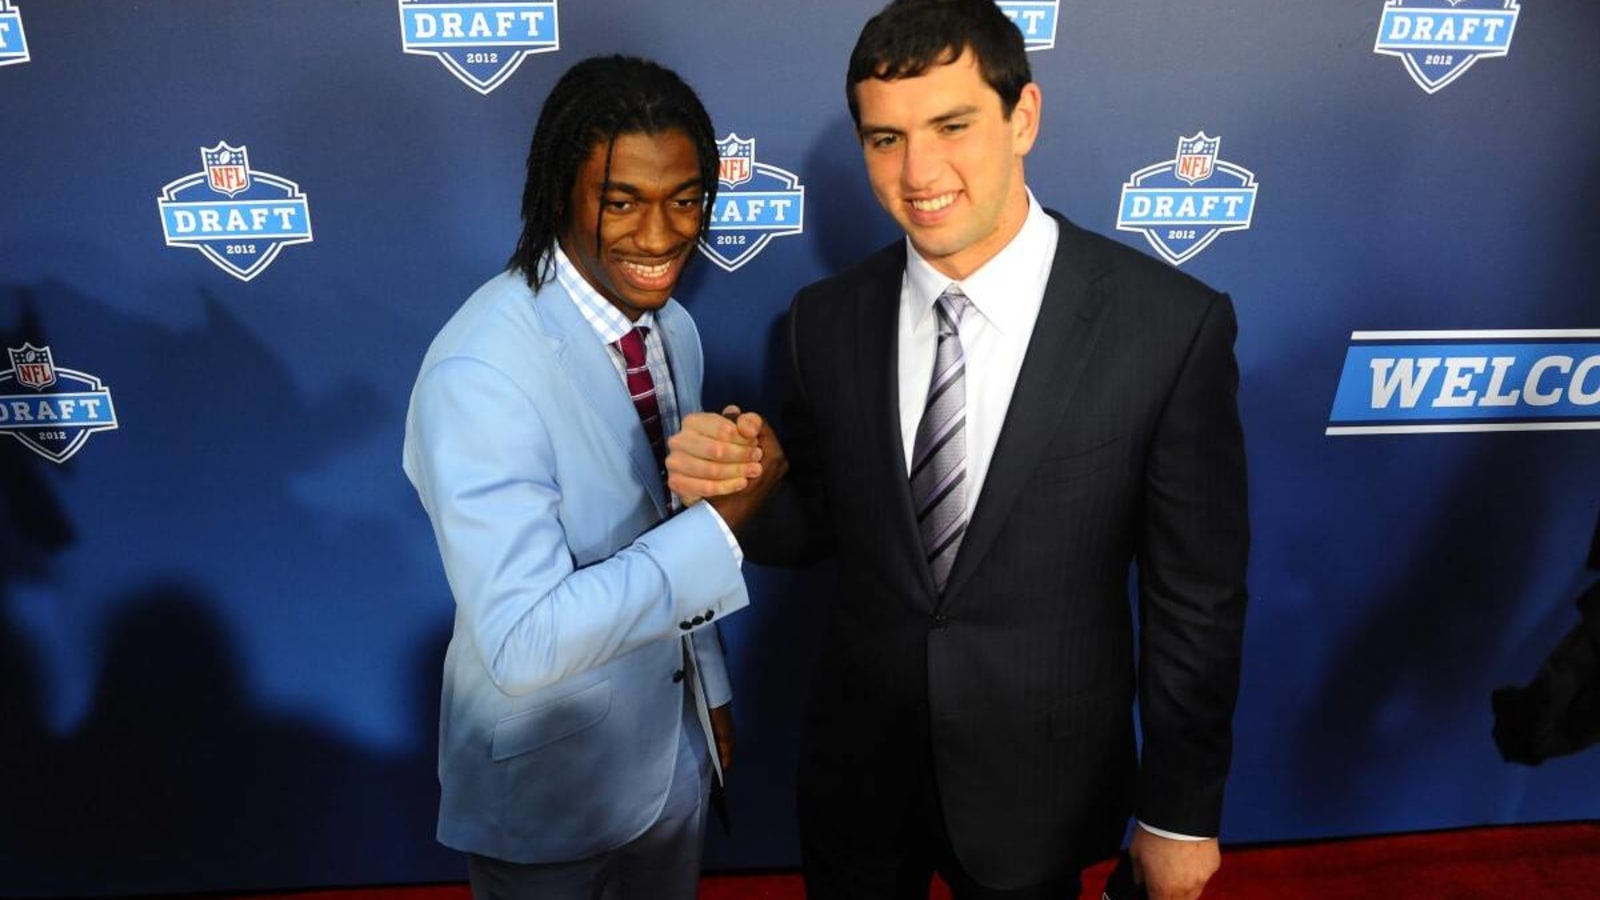 Robert Griffin III reveals not choosing Stanford led to grudge Jim Harbaugh held in the NFL